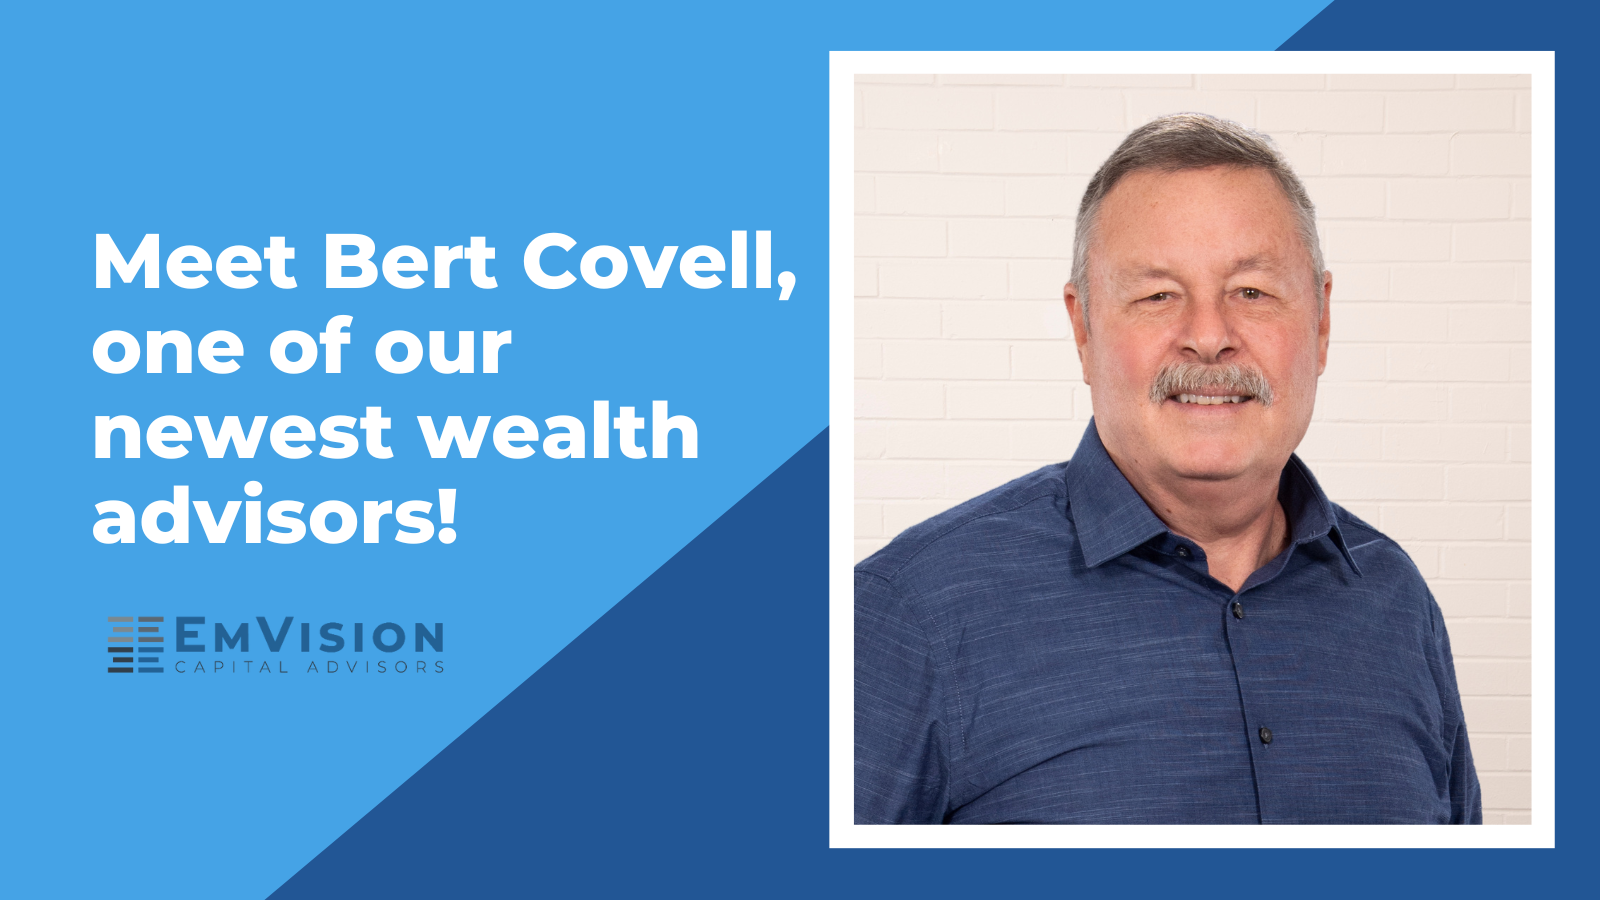 Commitment to Clients Leads Bert Covell to Join the EmVision Team